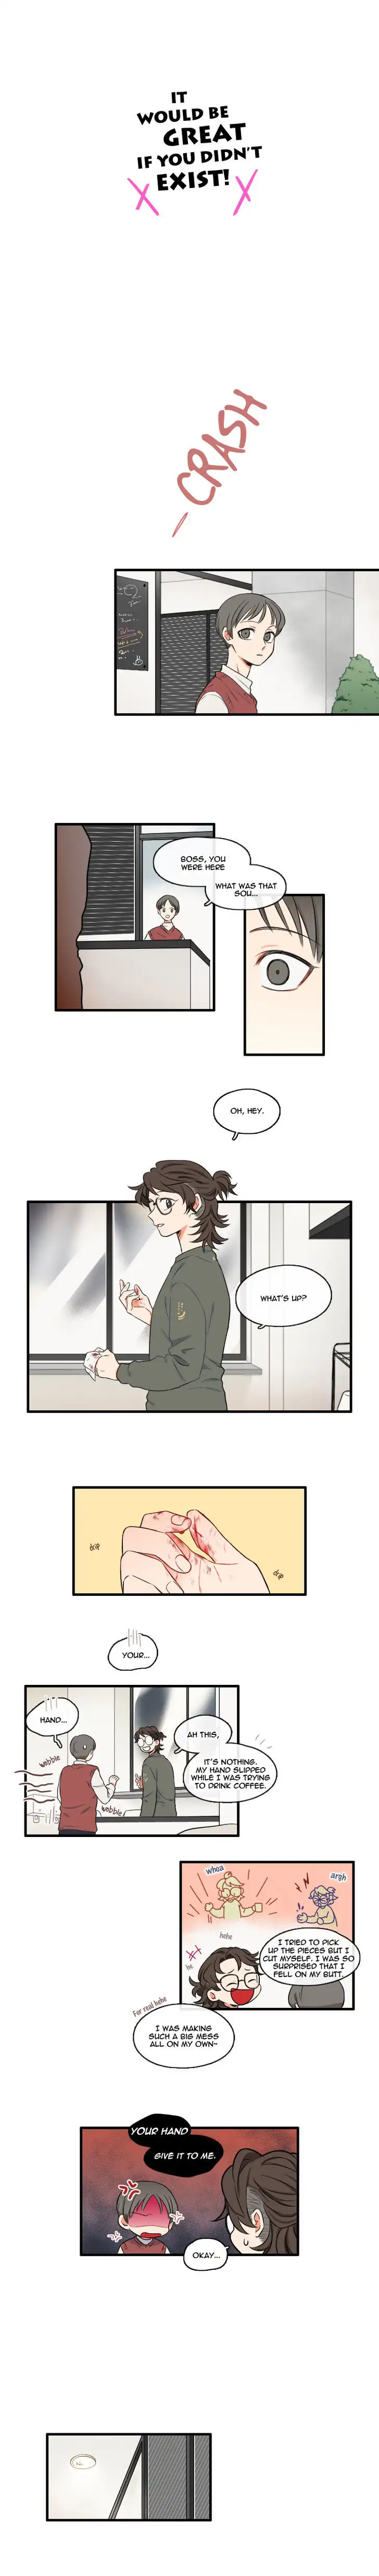 It Would Be Great if You Didn't Exist - Chapter 21 Page 2